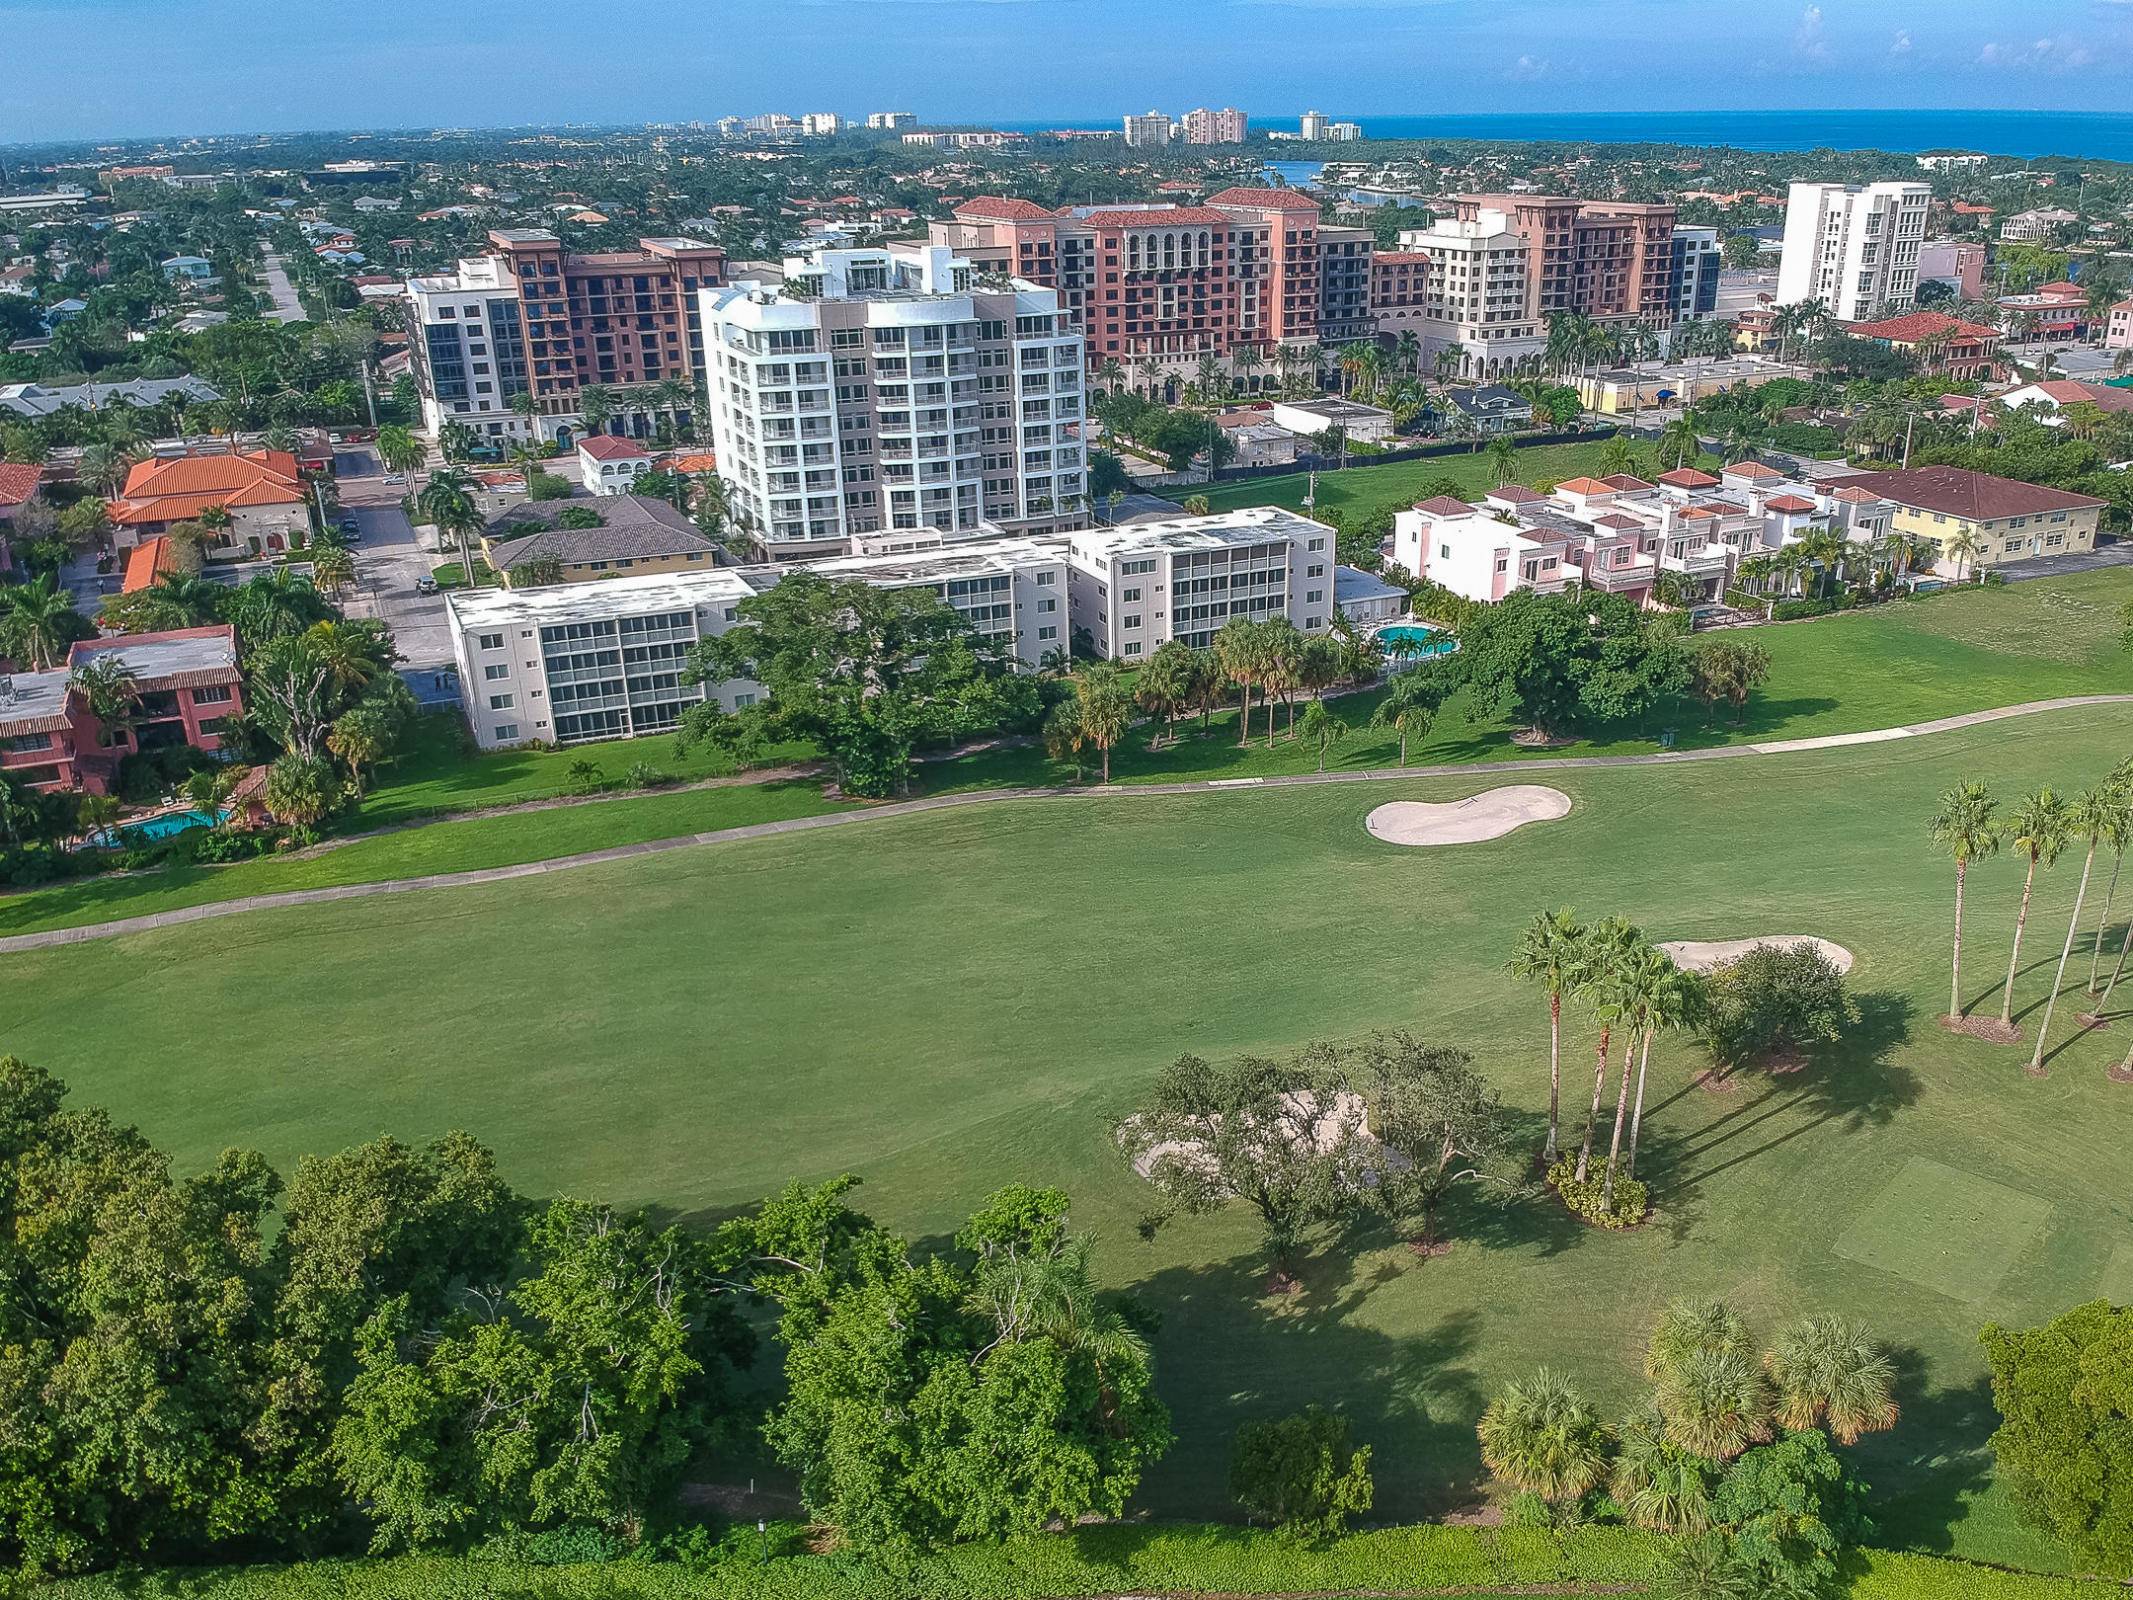 This beautiful Penthouse Corner unit over looks THE BOCA RATON used to be the Boca Raton Resort and Club golf course.